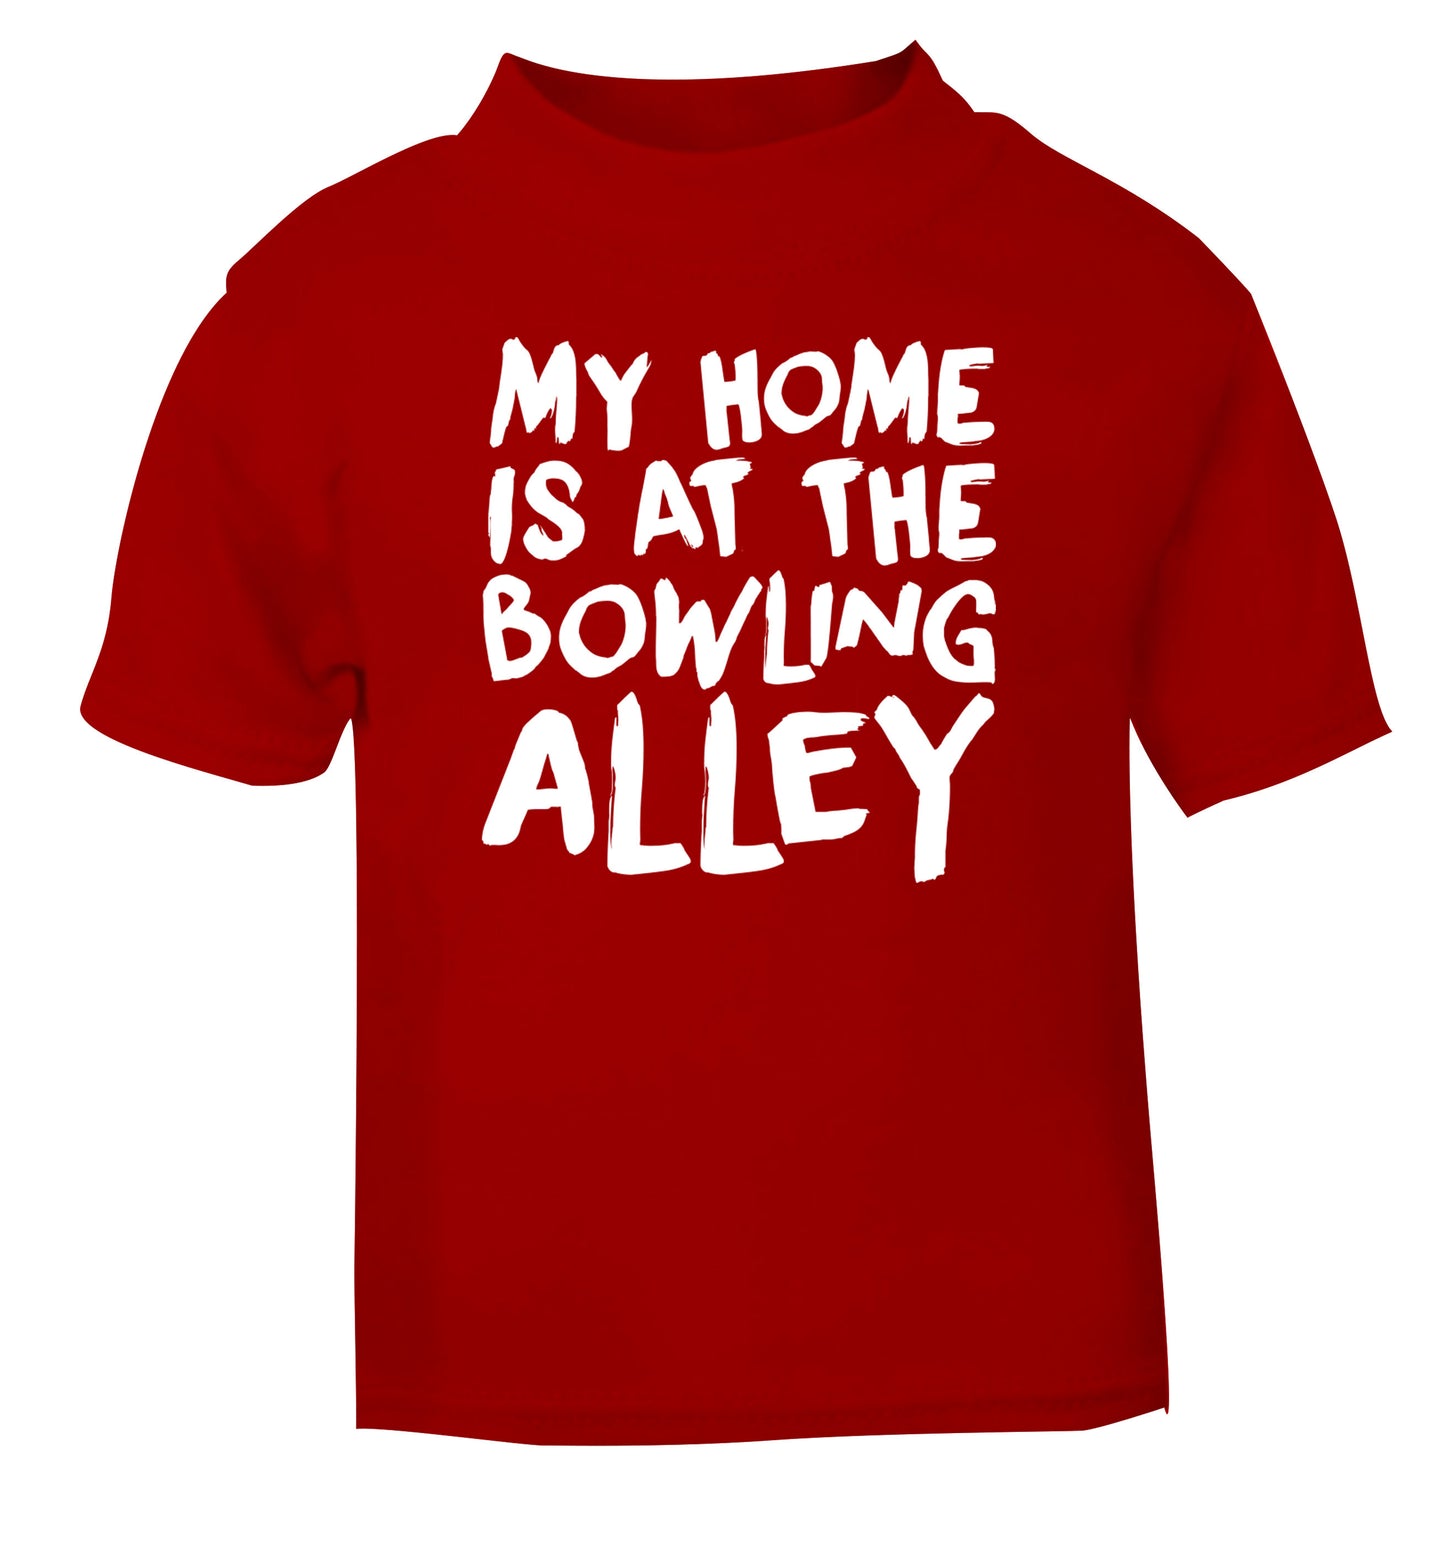 My home is at the bowling alley red Baby Toddler Tshirt 2 Years